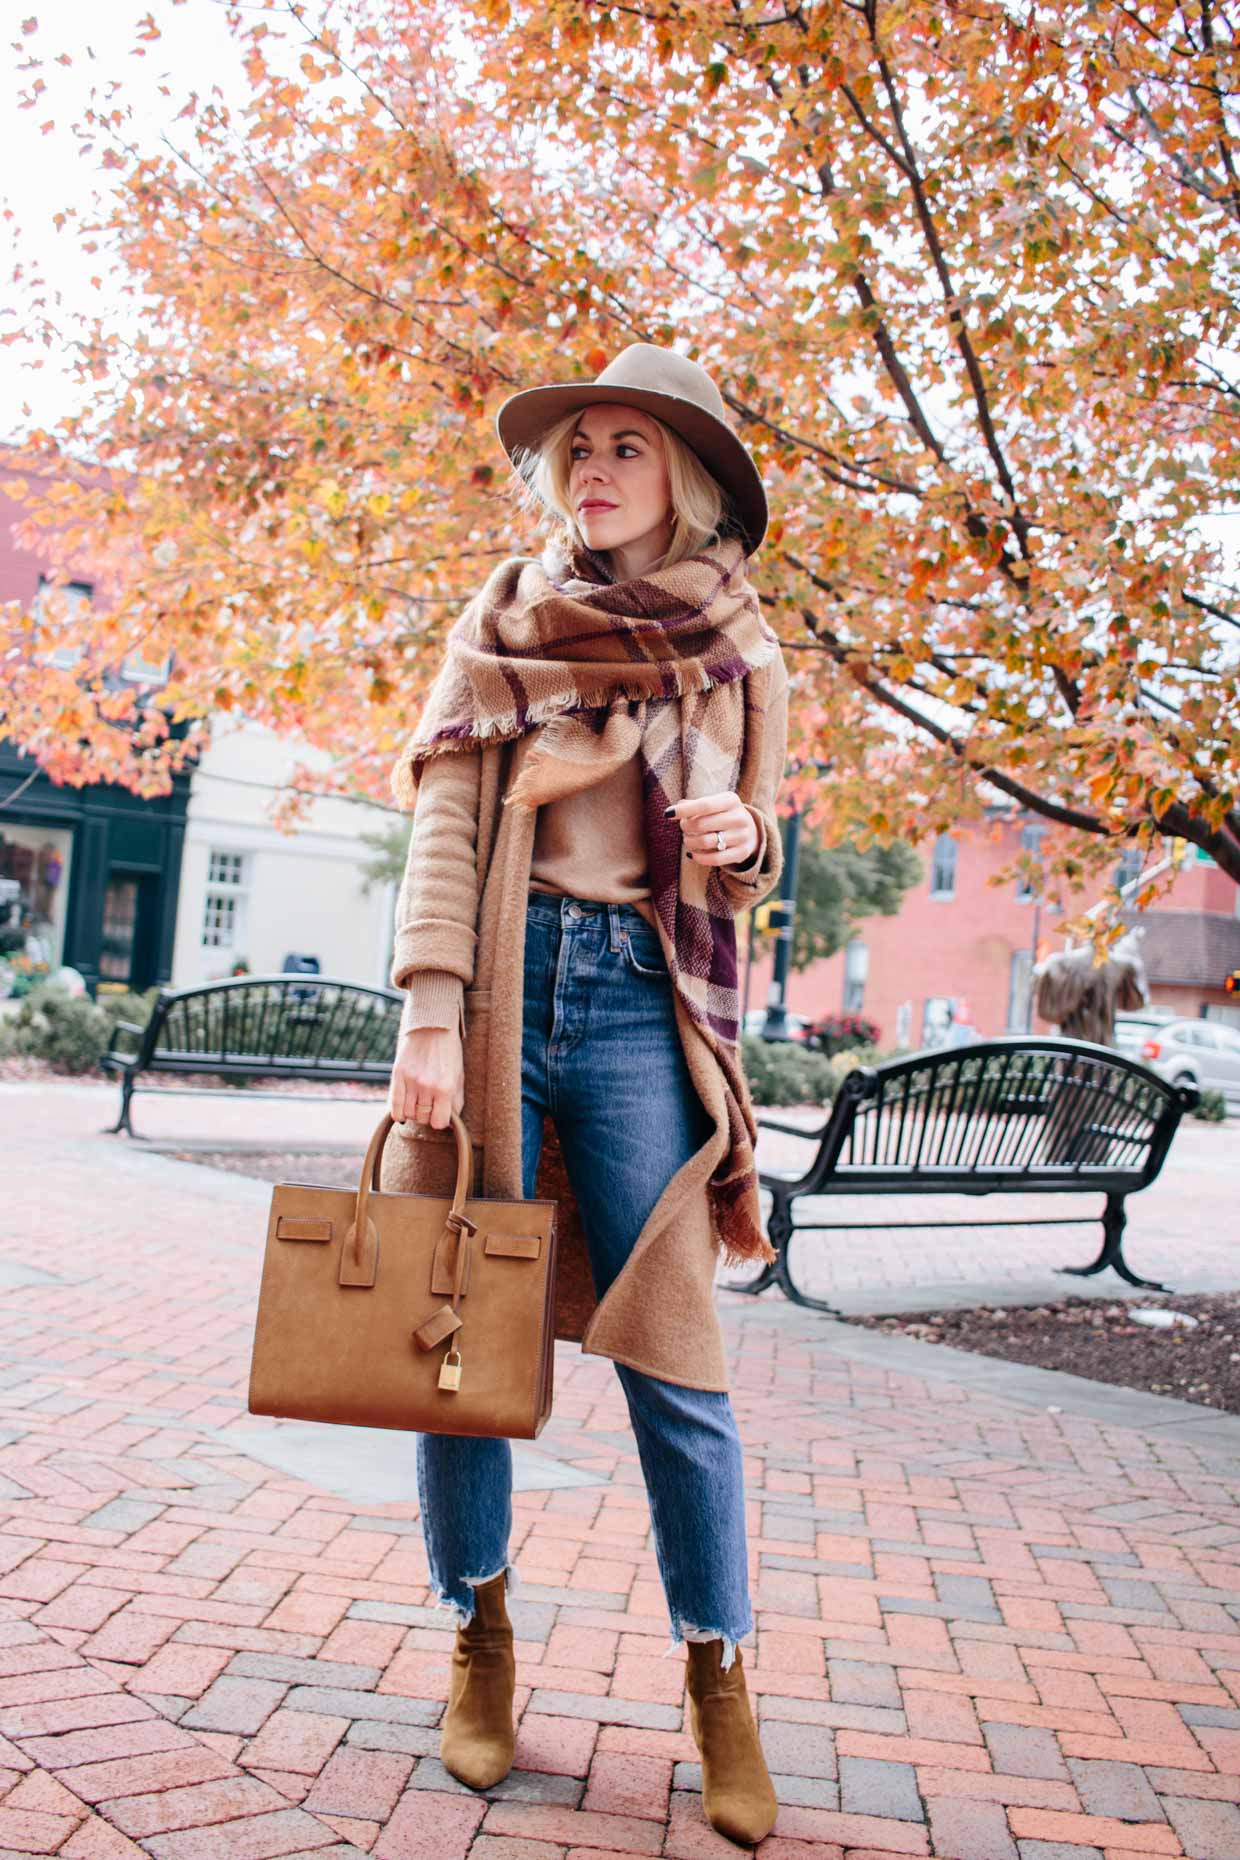 Thanksgiving Outfit Ideas for Casual or Formal Celebrations